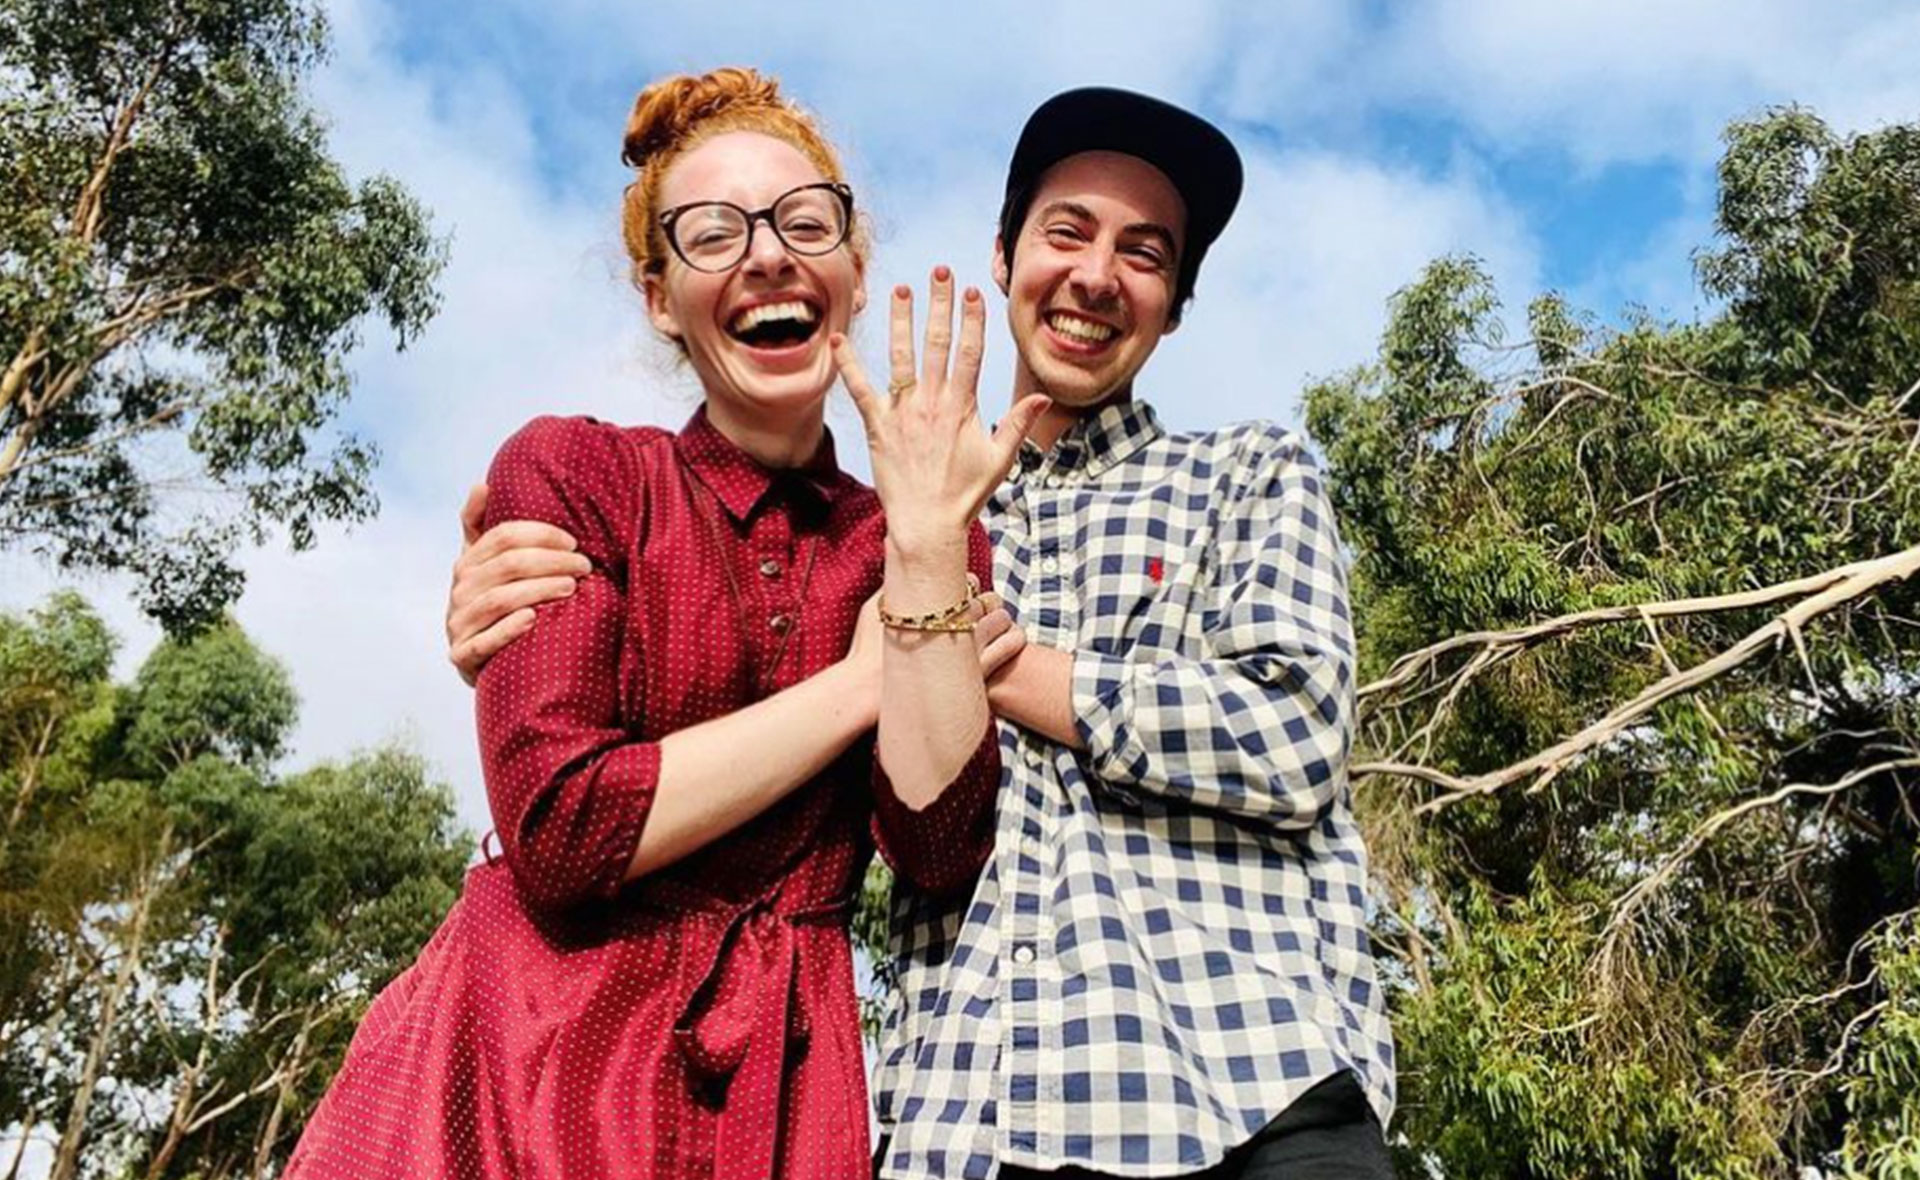 “When life gets more sparkly!” Yellow Wiggle Emma Watkins announces her engagement to fellow bandmate Oliver Brian